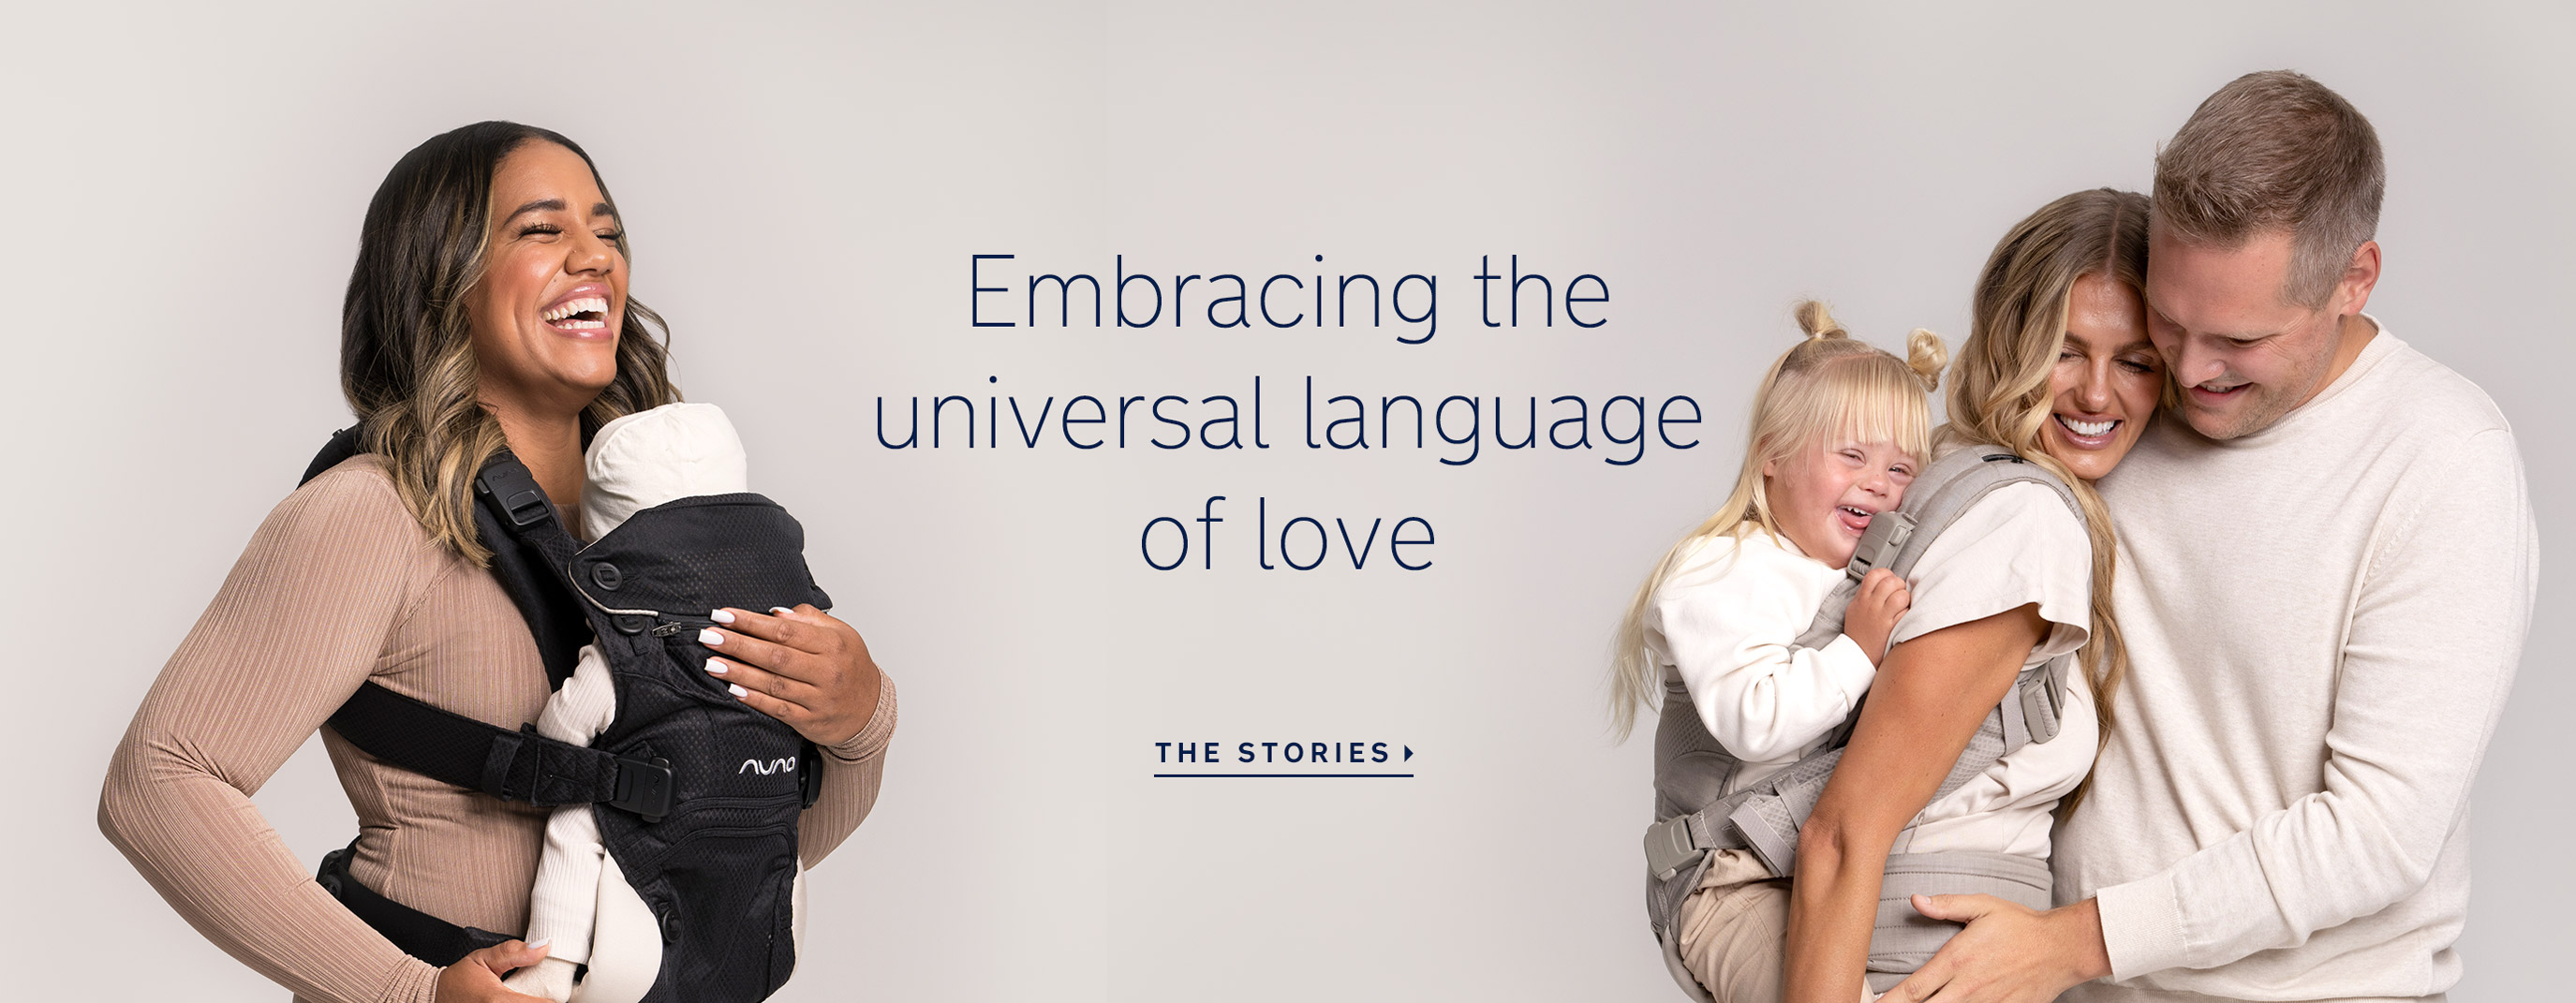 Nuna CUDL, Embracing the universal language of love. READ THE STORIES